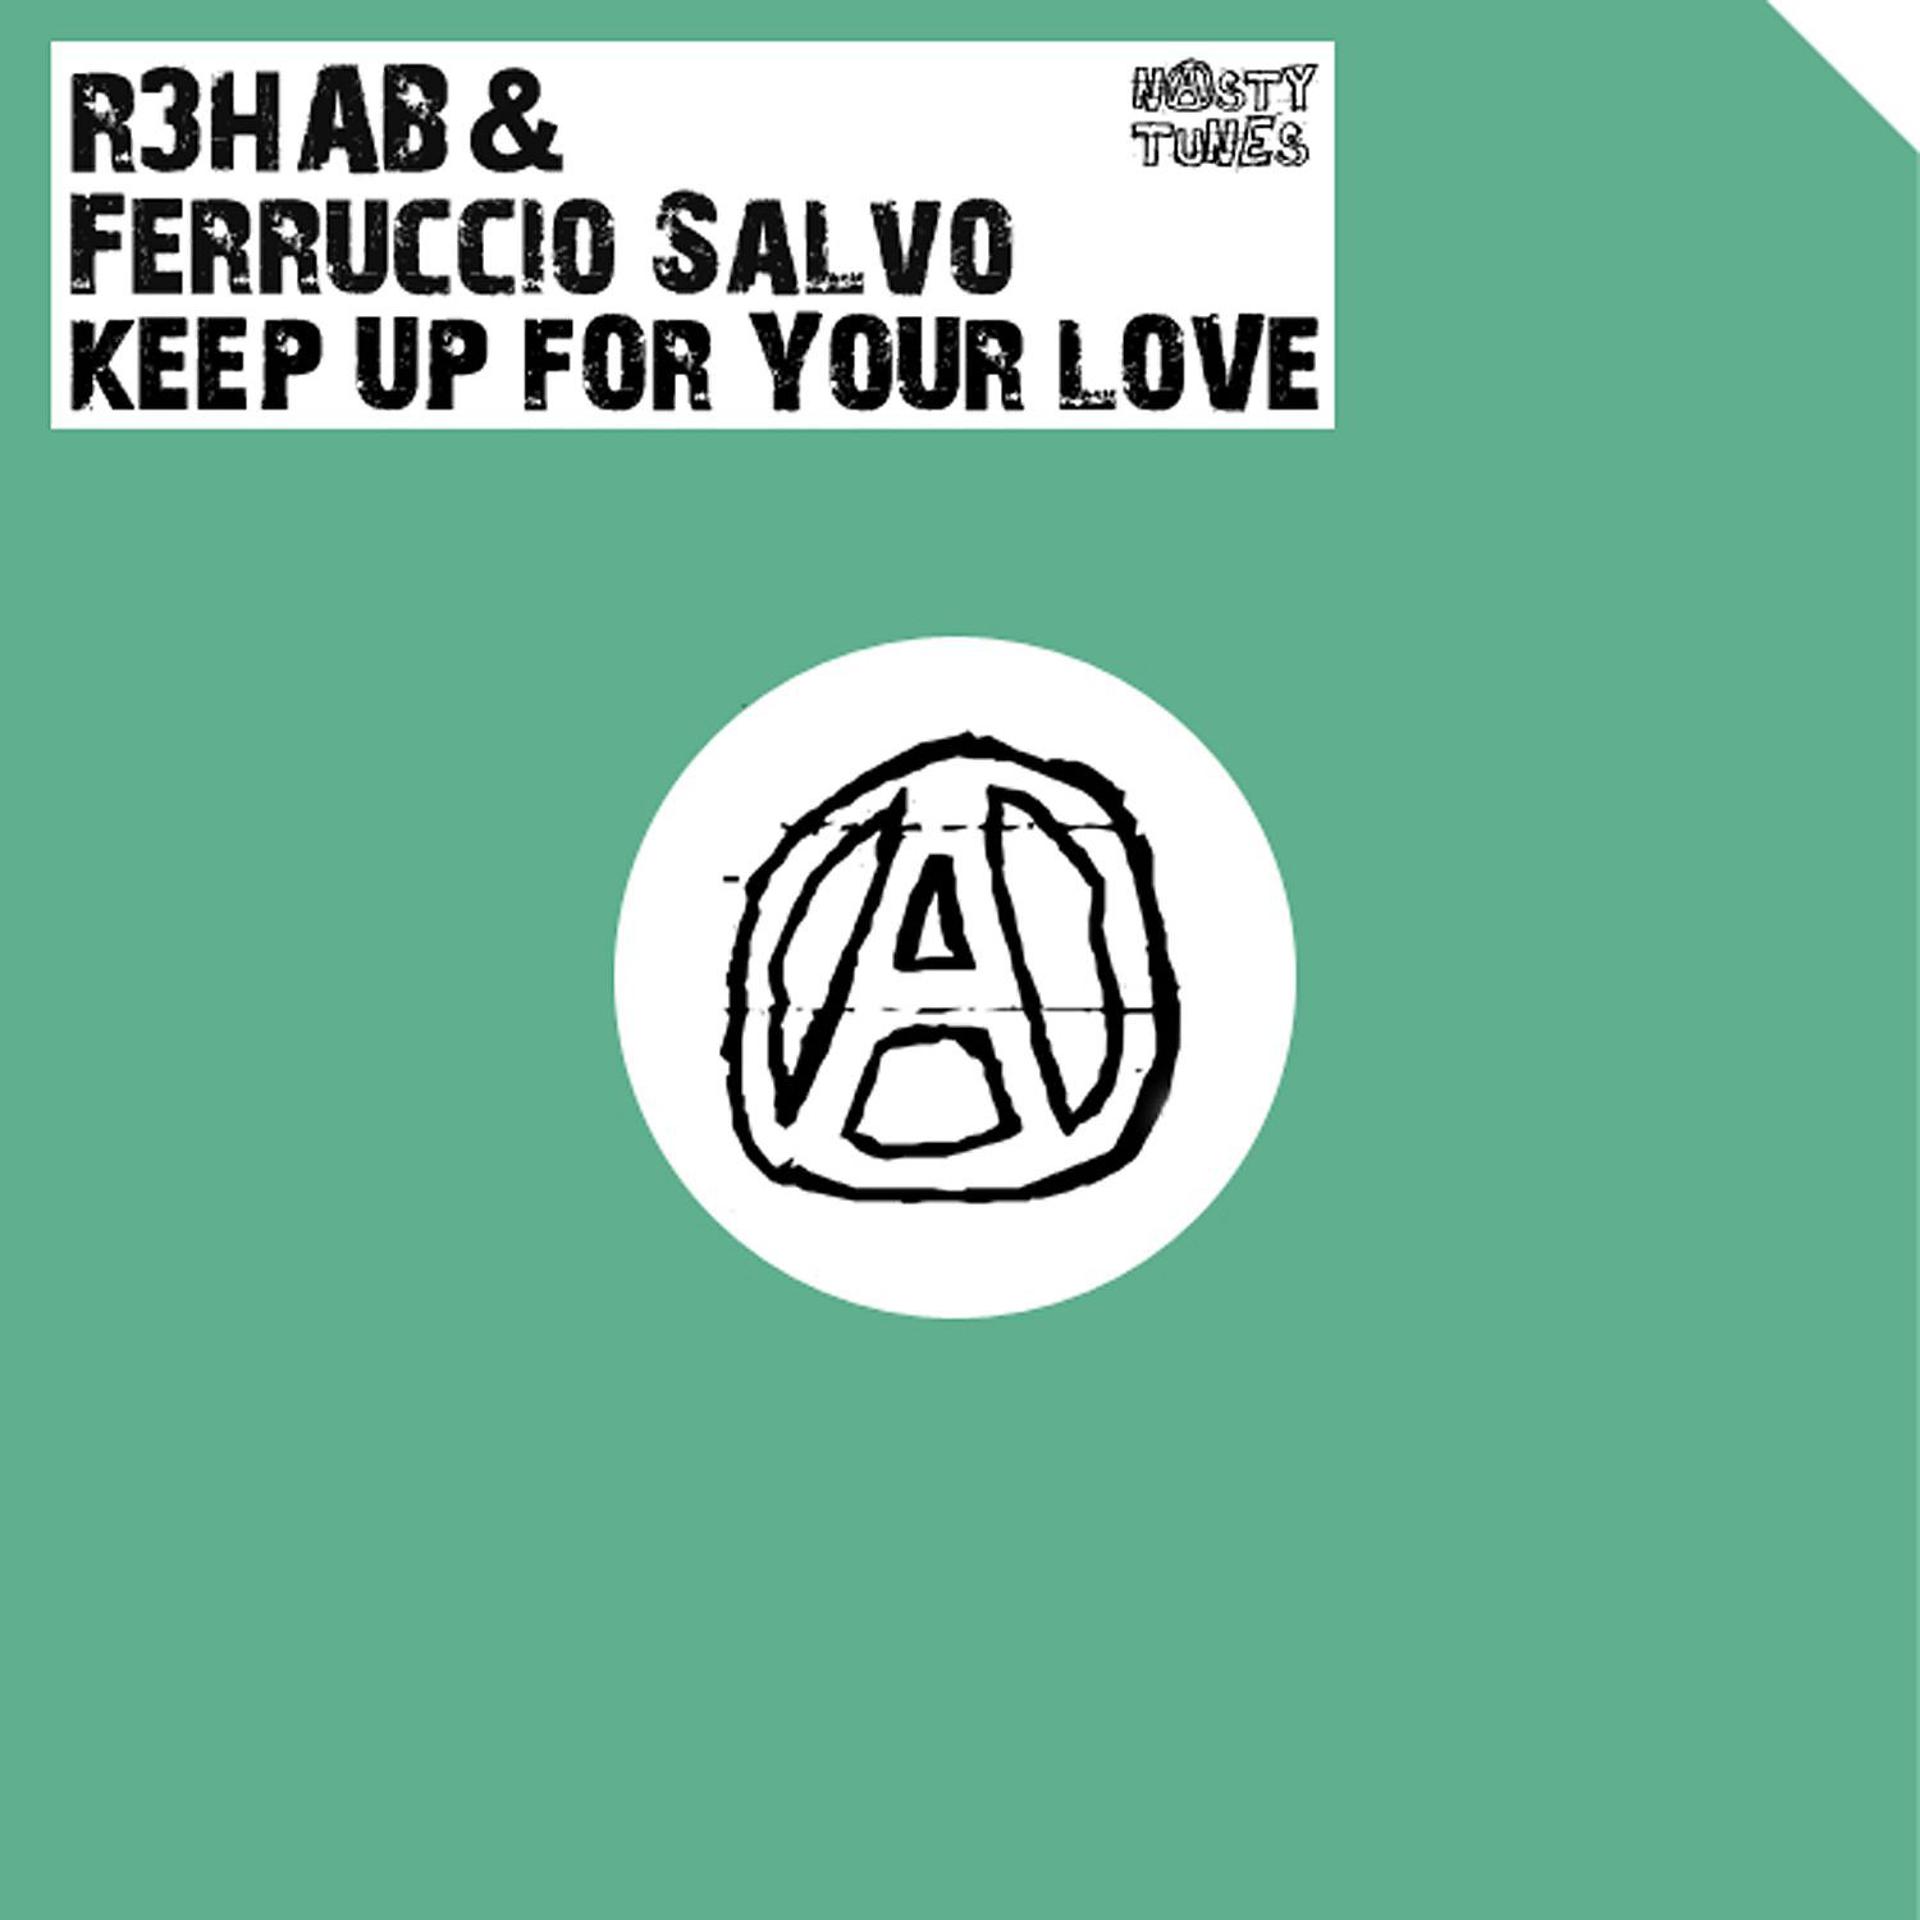 Keep your love. Keep up for your Love Remixes r3hab, Ferruccio Salvo. Love hab. Обложка альбома r3hab & Ciara - get up (Original Mix). STENIX keep it up.